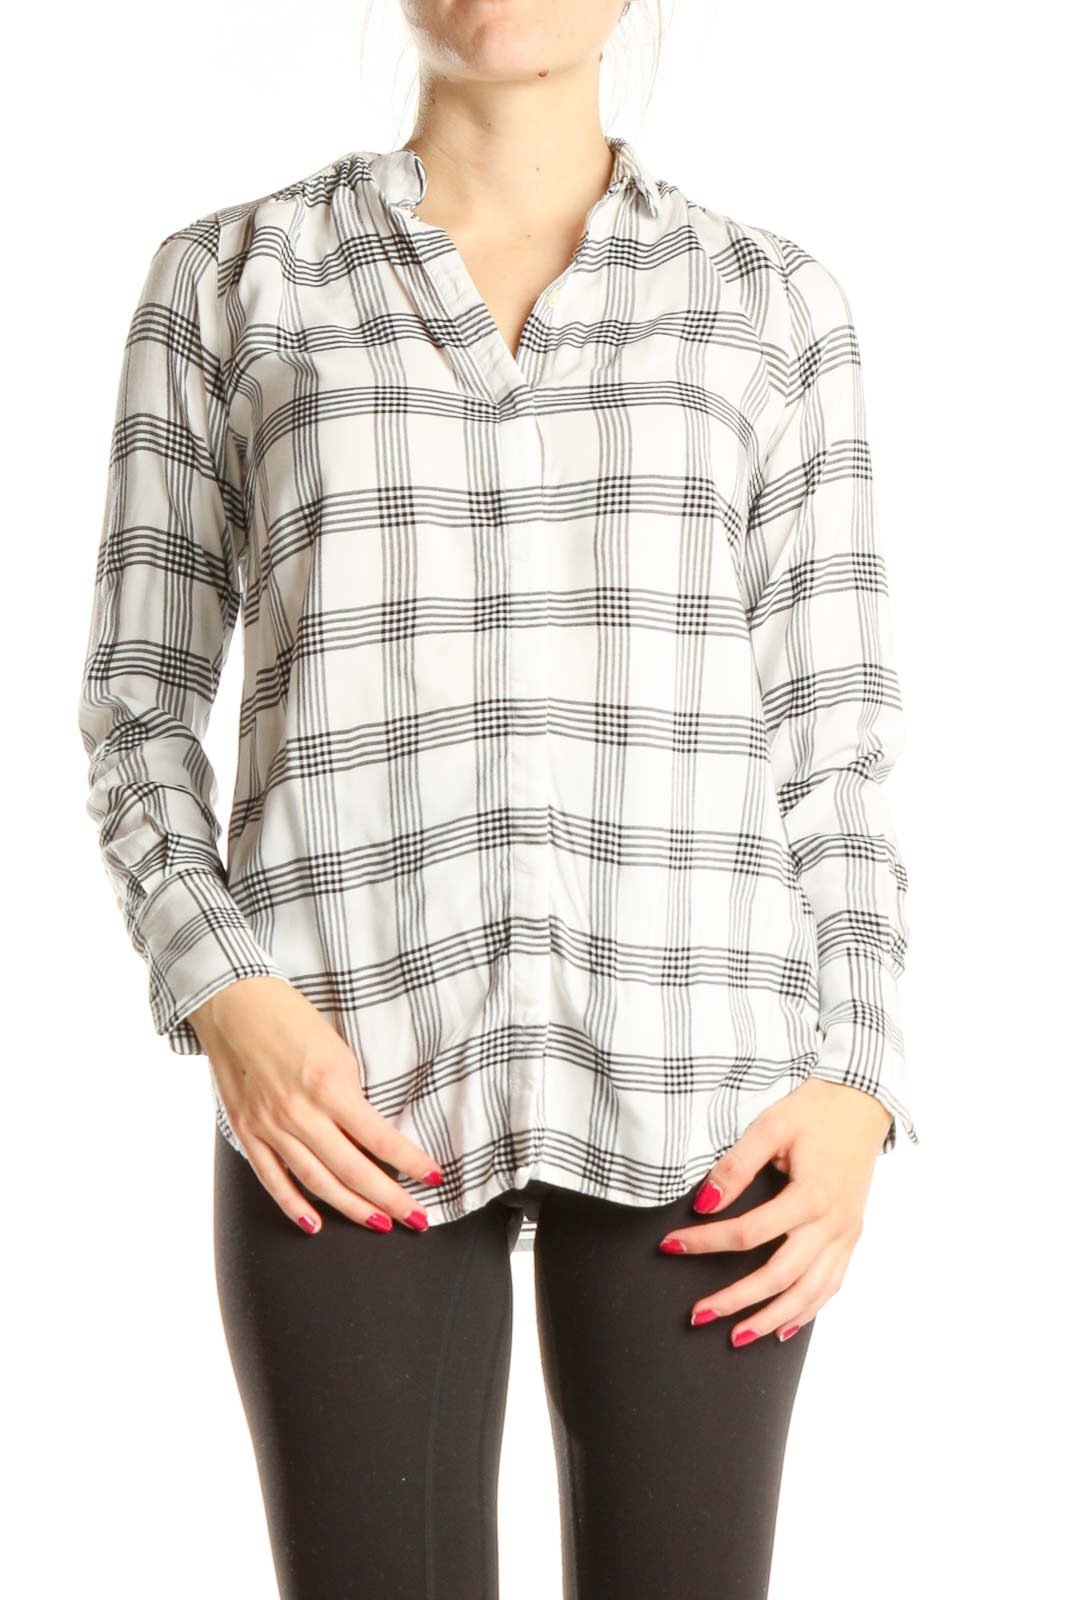 White Black Checkered Casual Top Front